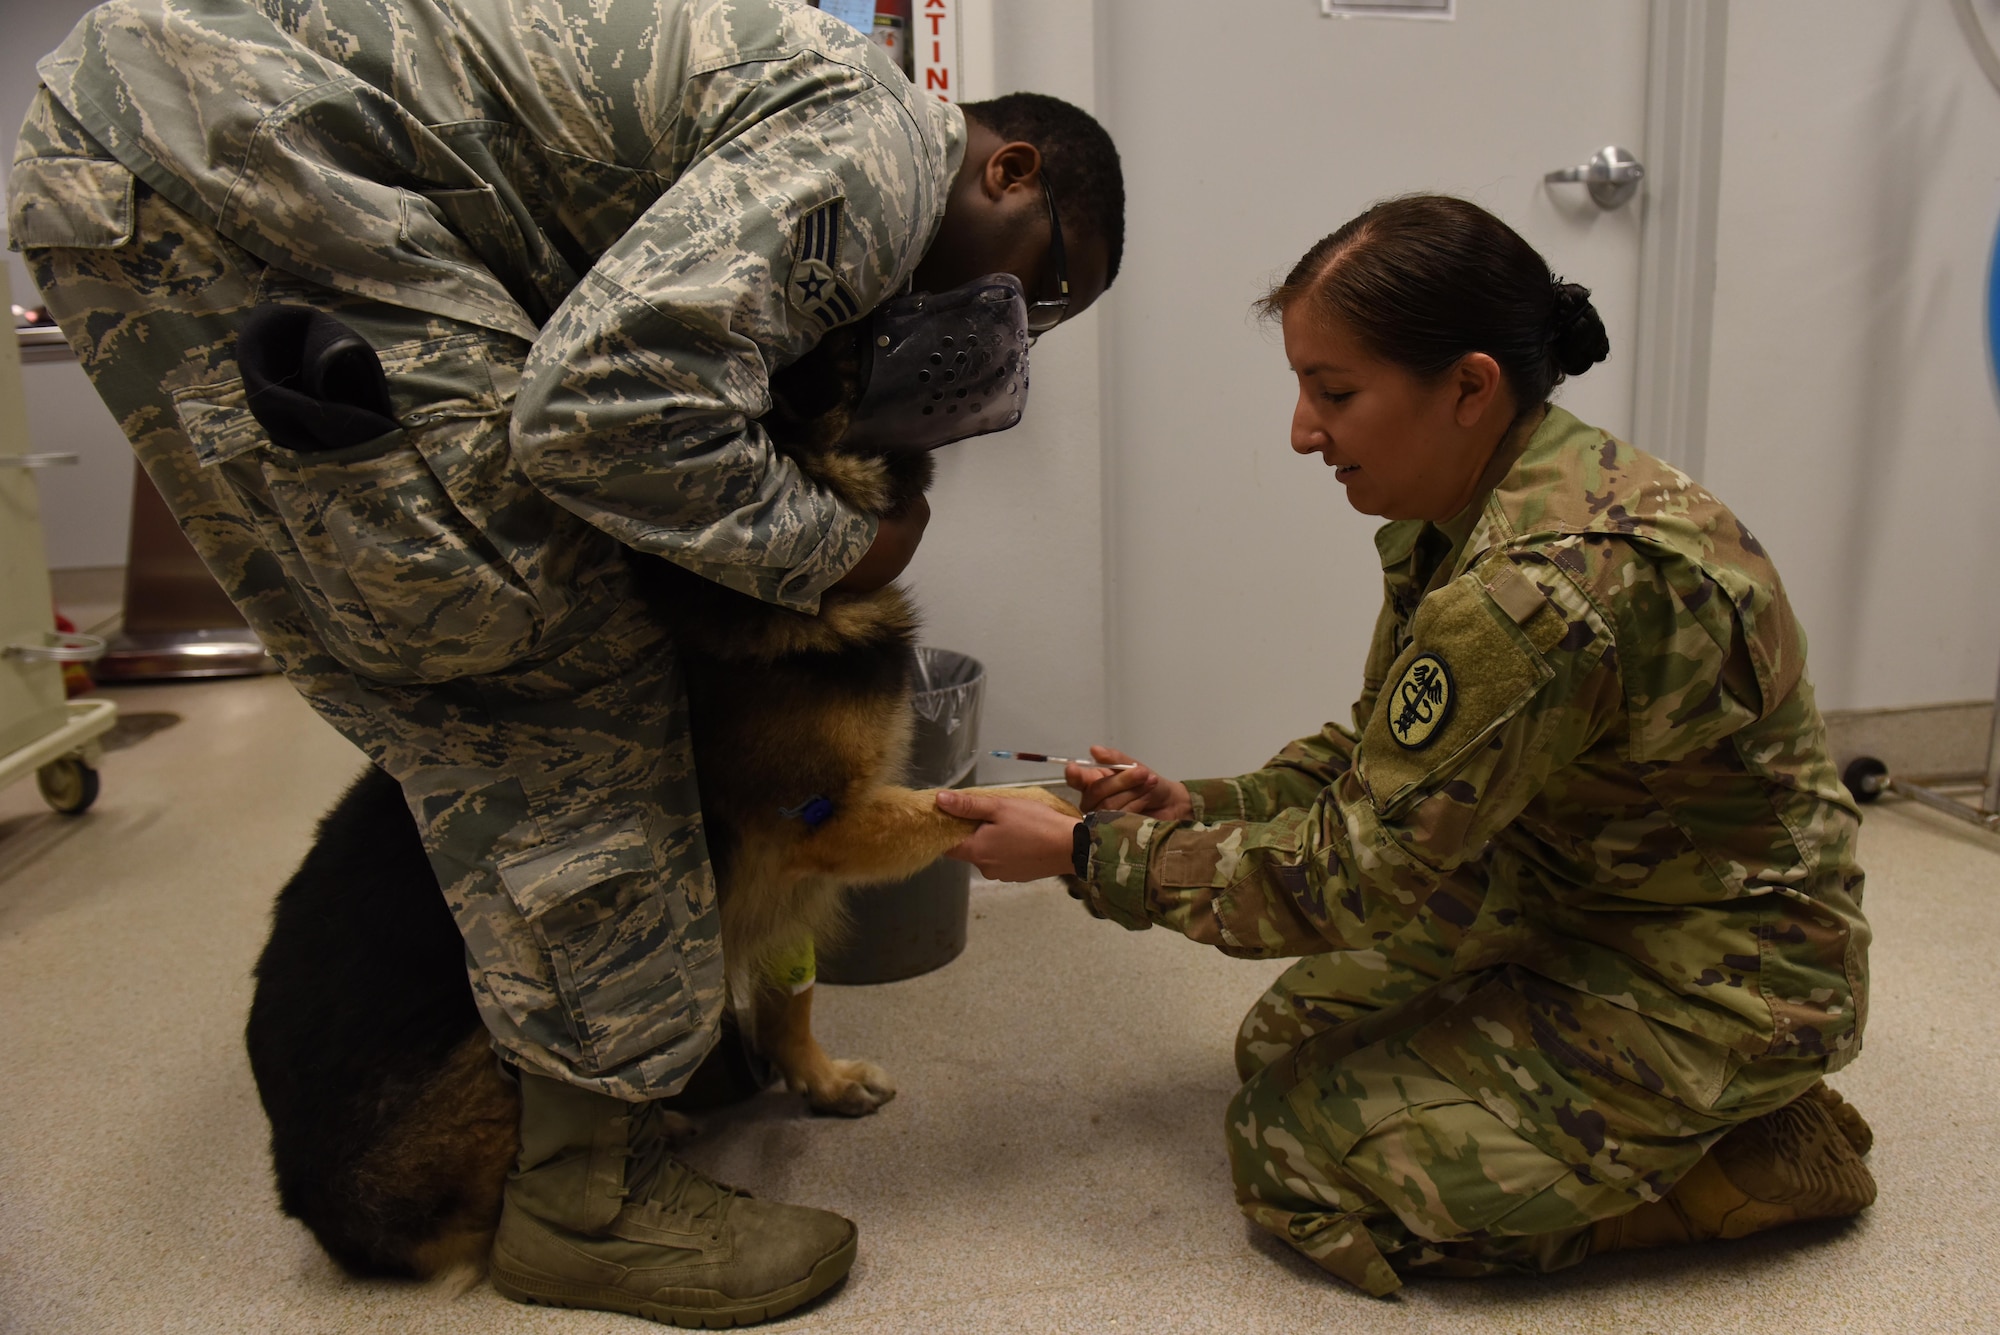 U.S. Army Capt. Sarah Merriday, right, Public Health Activity Veterinary Corps officer, draws blood from Military Working Dog Jeck for a check-up April 18, 2017, at Little Rock Air Force Base, Ark. The Little Rock AFB Veterinary Treatment Facility personnel are the primary care managers for MWDs on base. (U.S. Air Force photo by Senior Airman Mercedes Taylor)